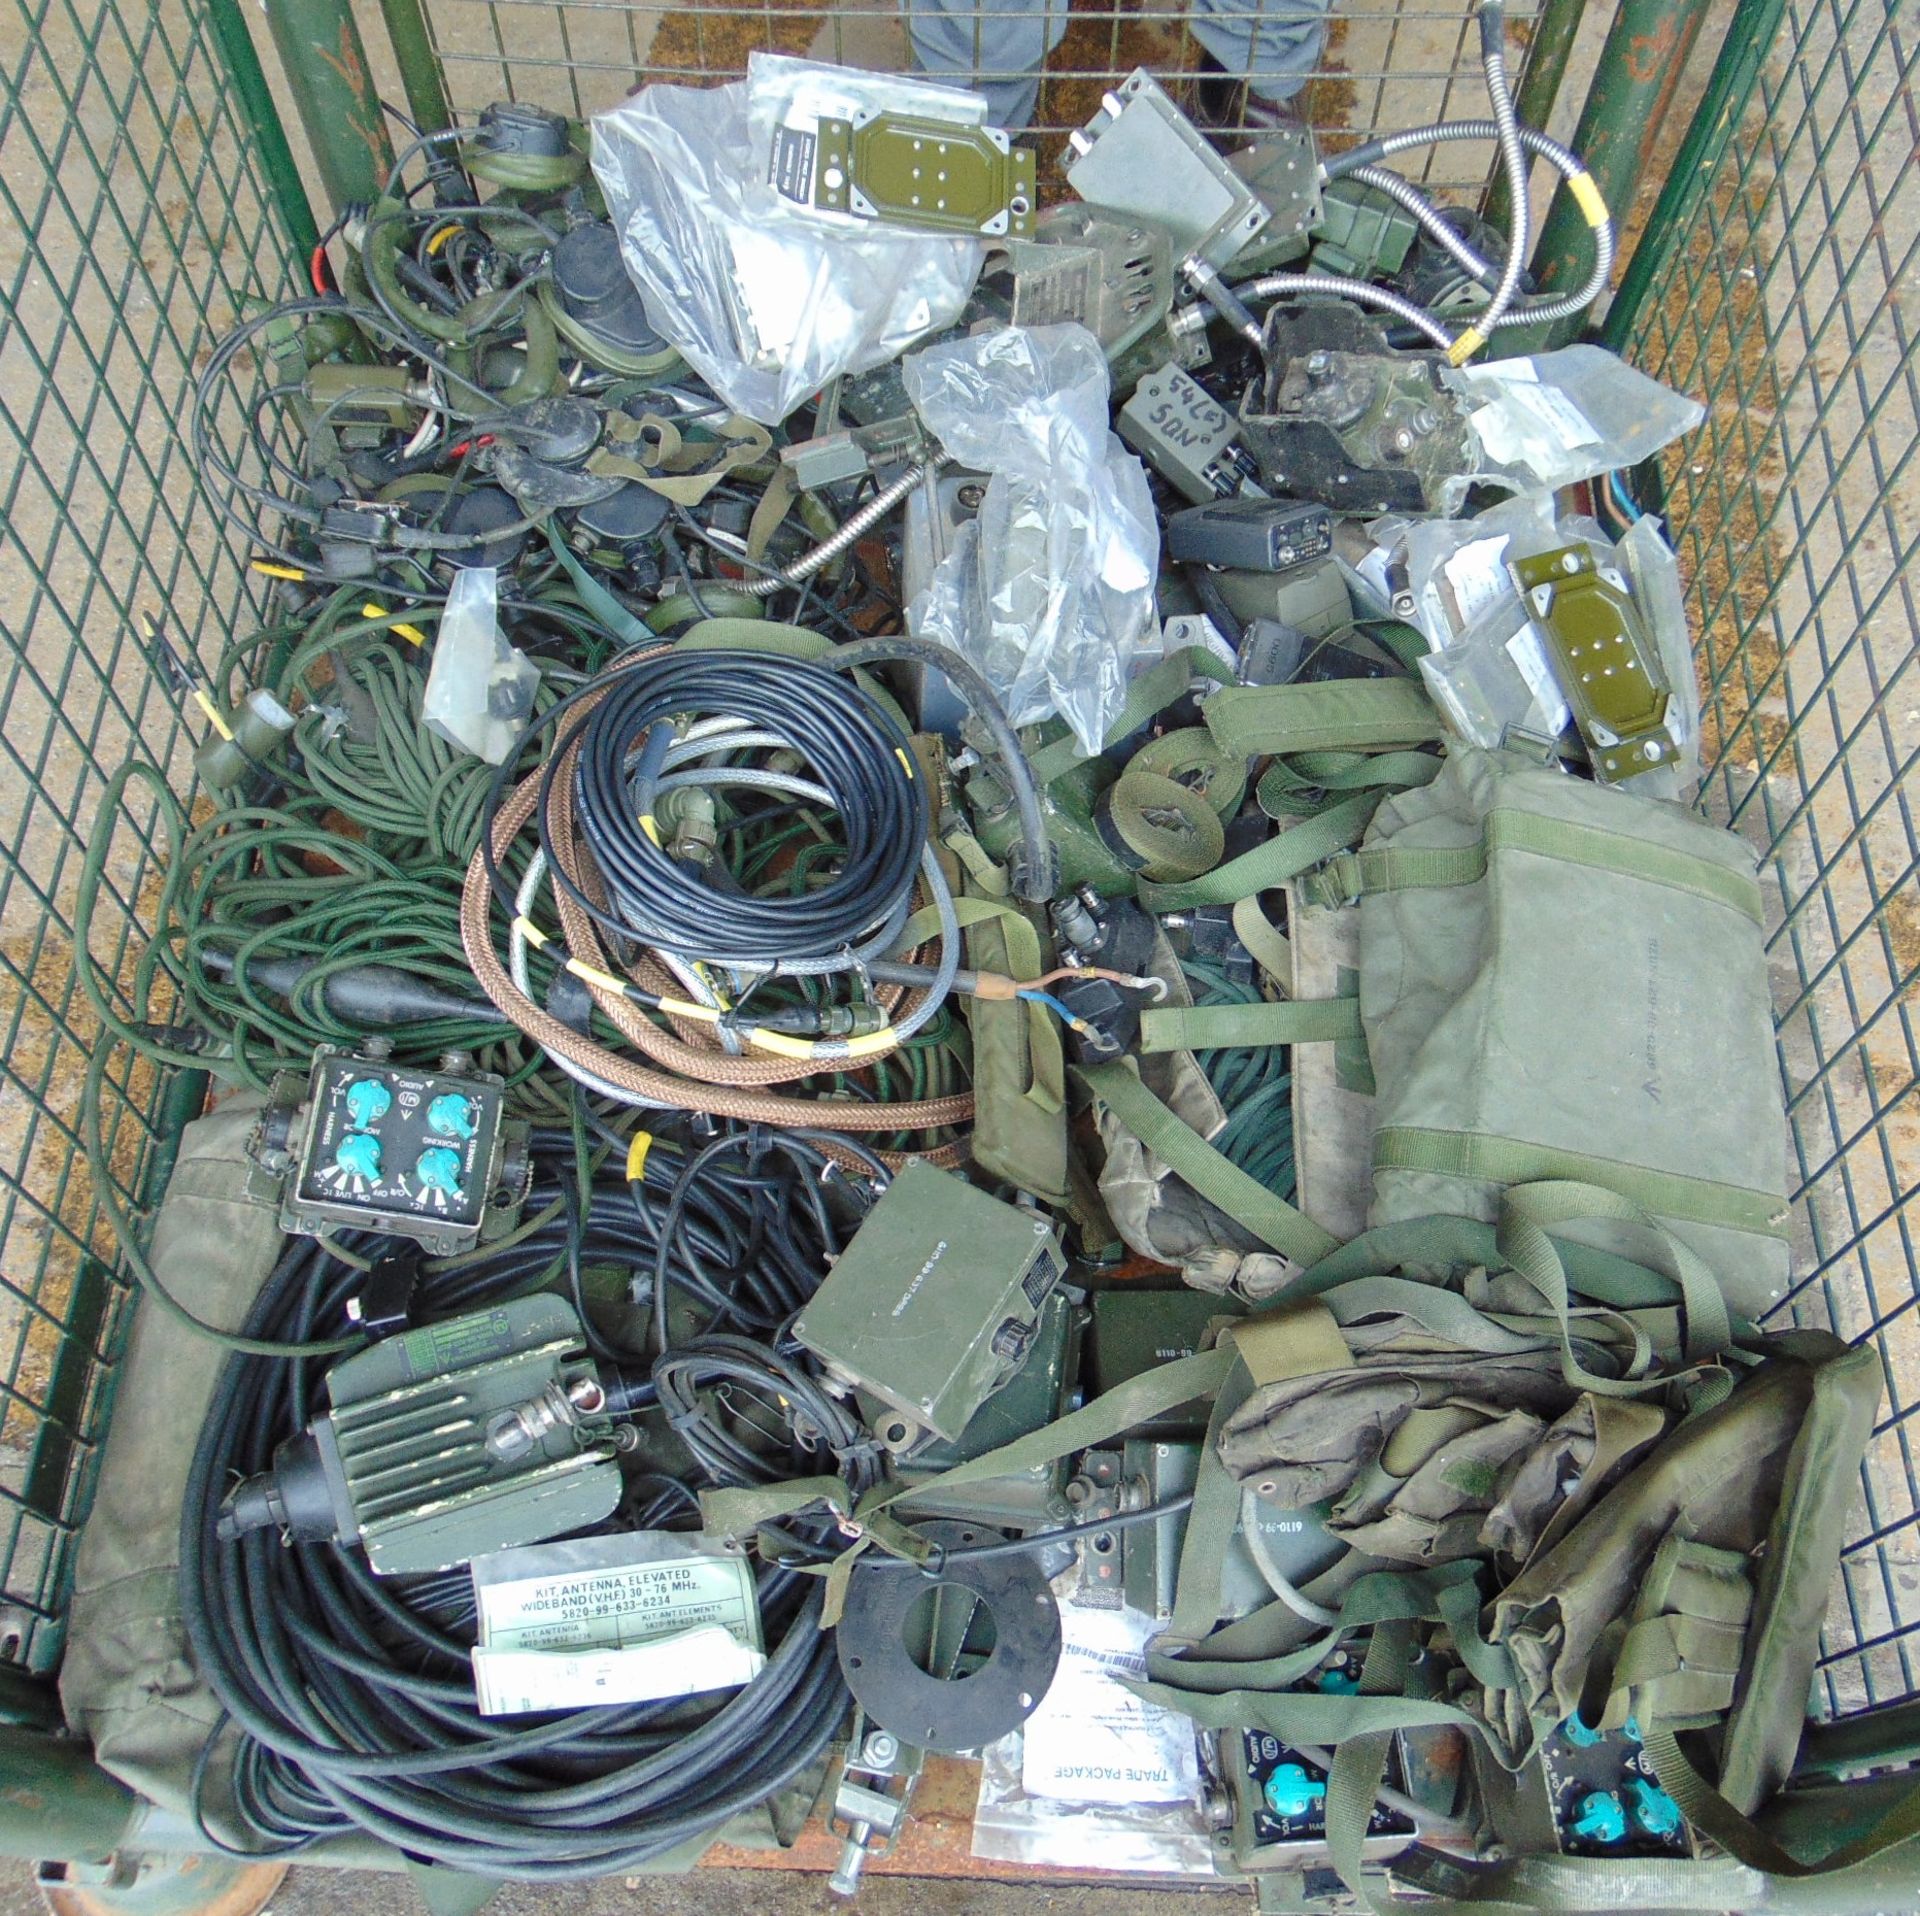 Stillage of Clansman Radio equipment inc Headsets, Audio Bags, Cables ect - Image 2 of 4